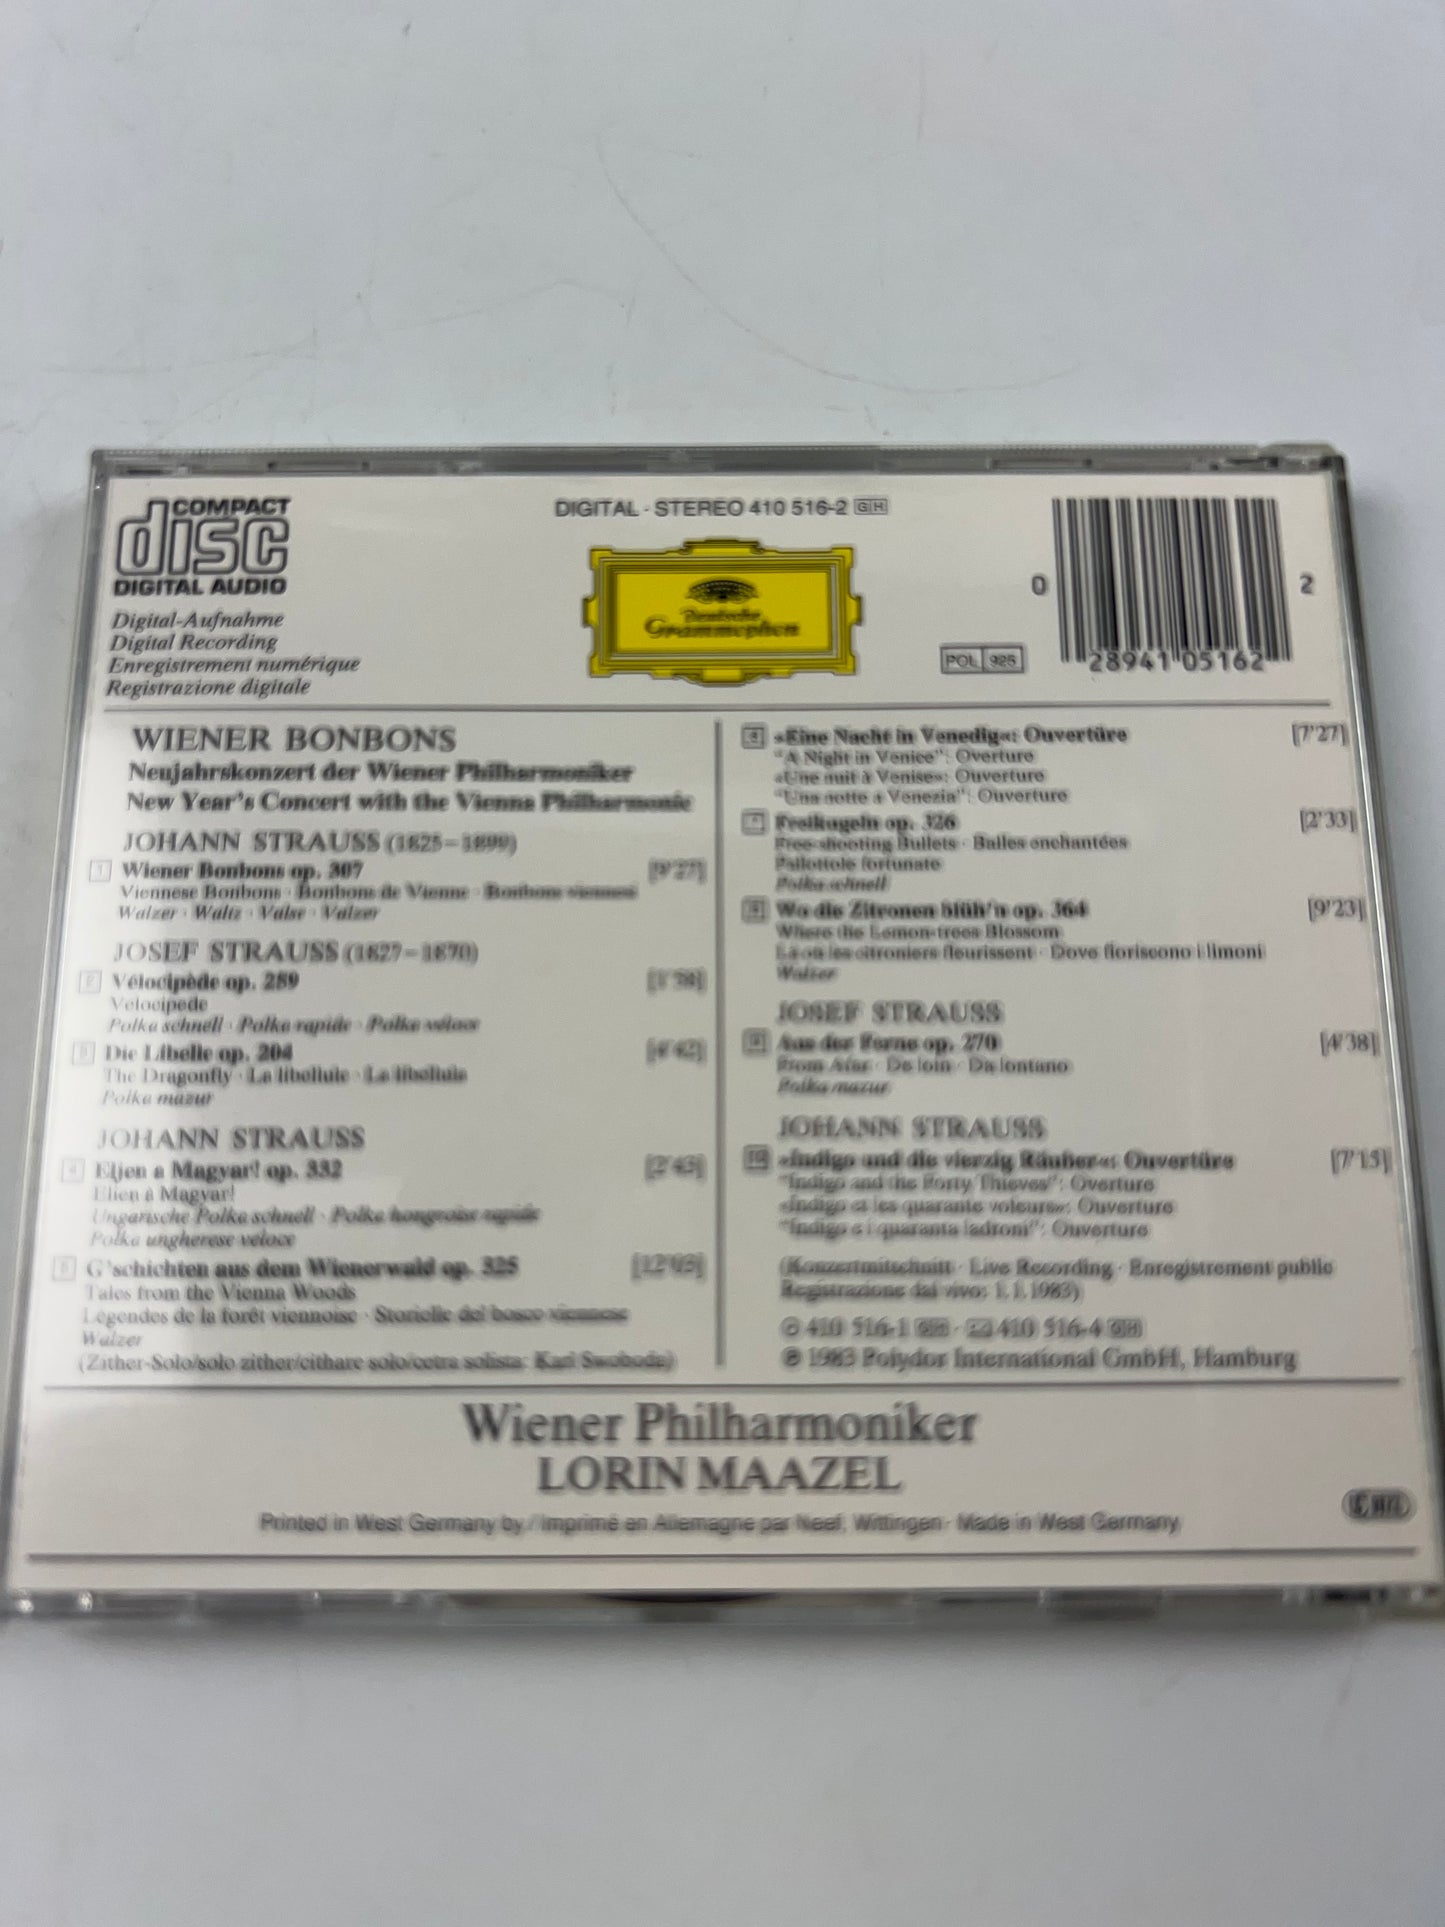 Wiener Bonbons: New Year's Concert with the Vienna Philharmonic 1983